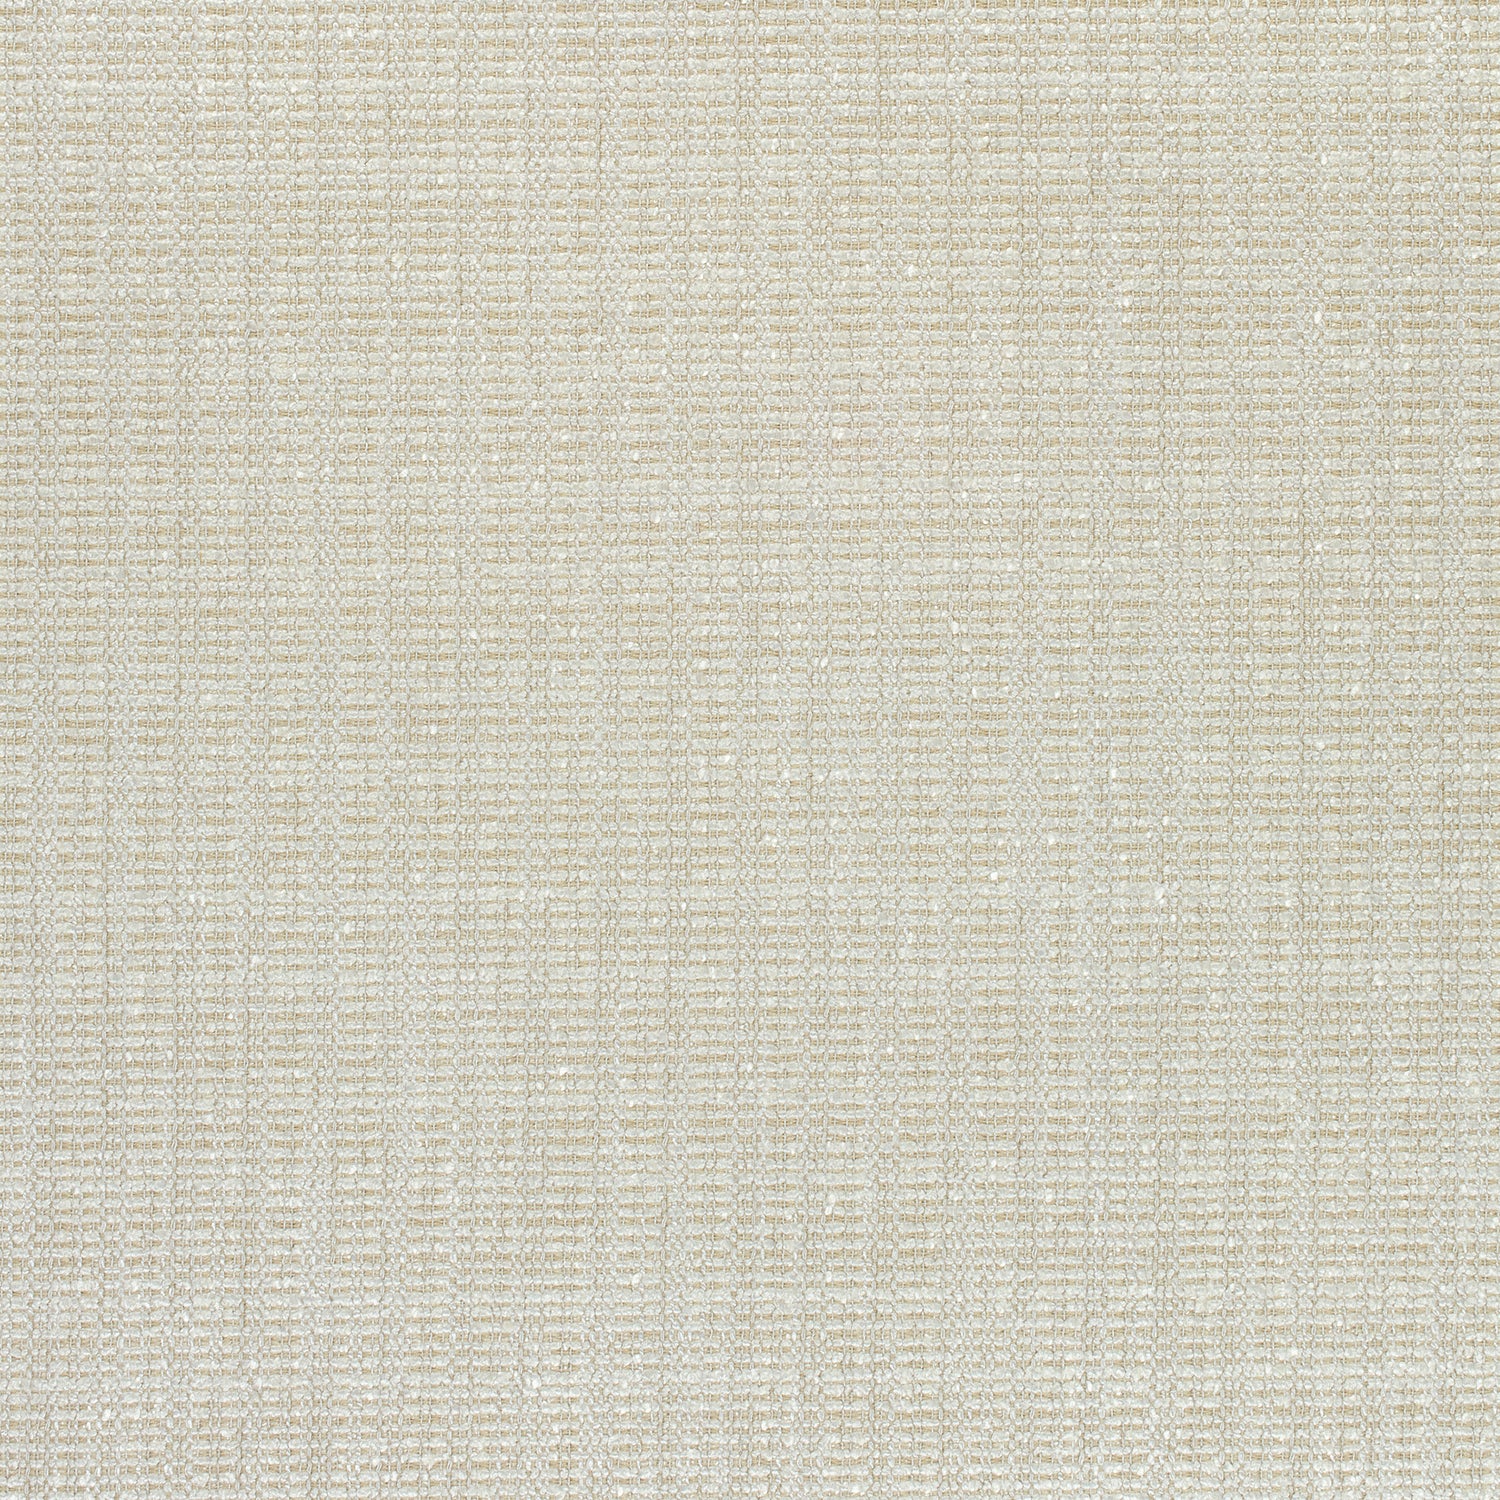 Avery fabric in linen color - pattern number W789132 - by Thibaut in the Reverie collection